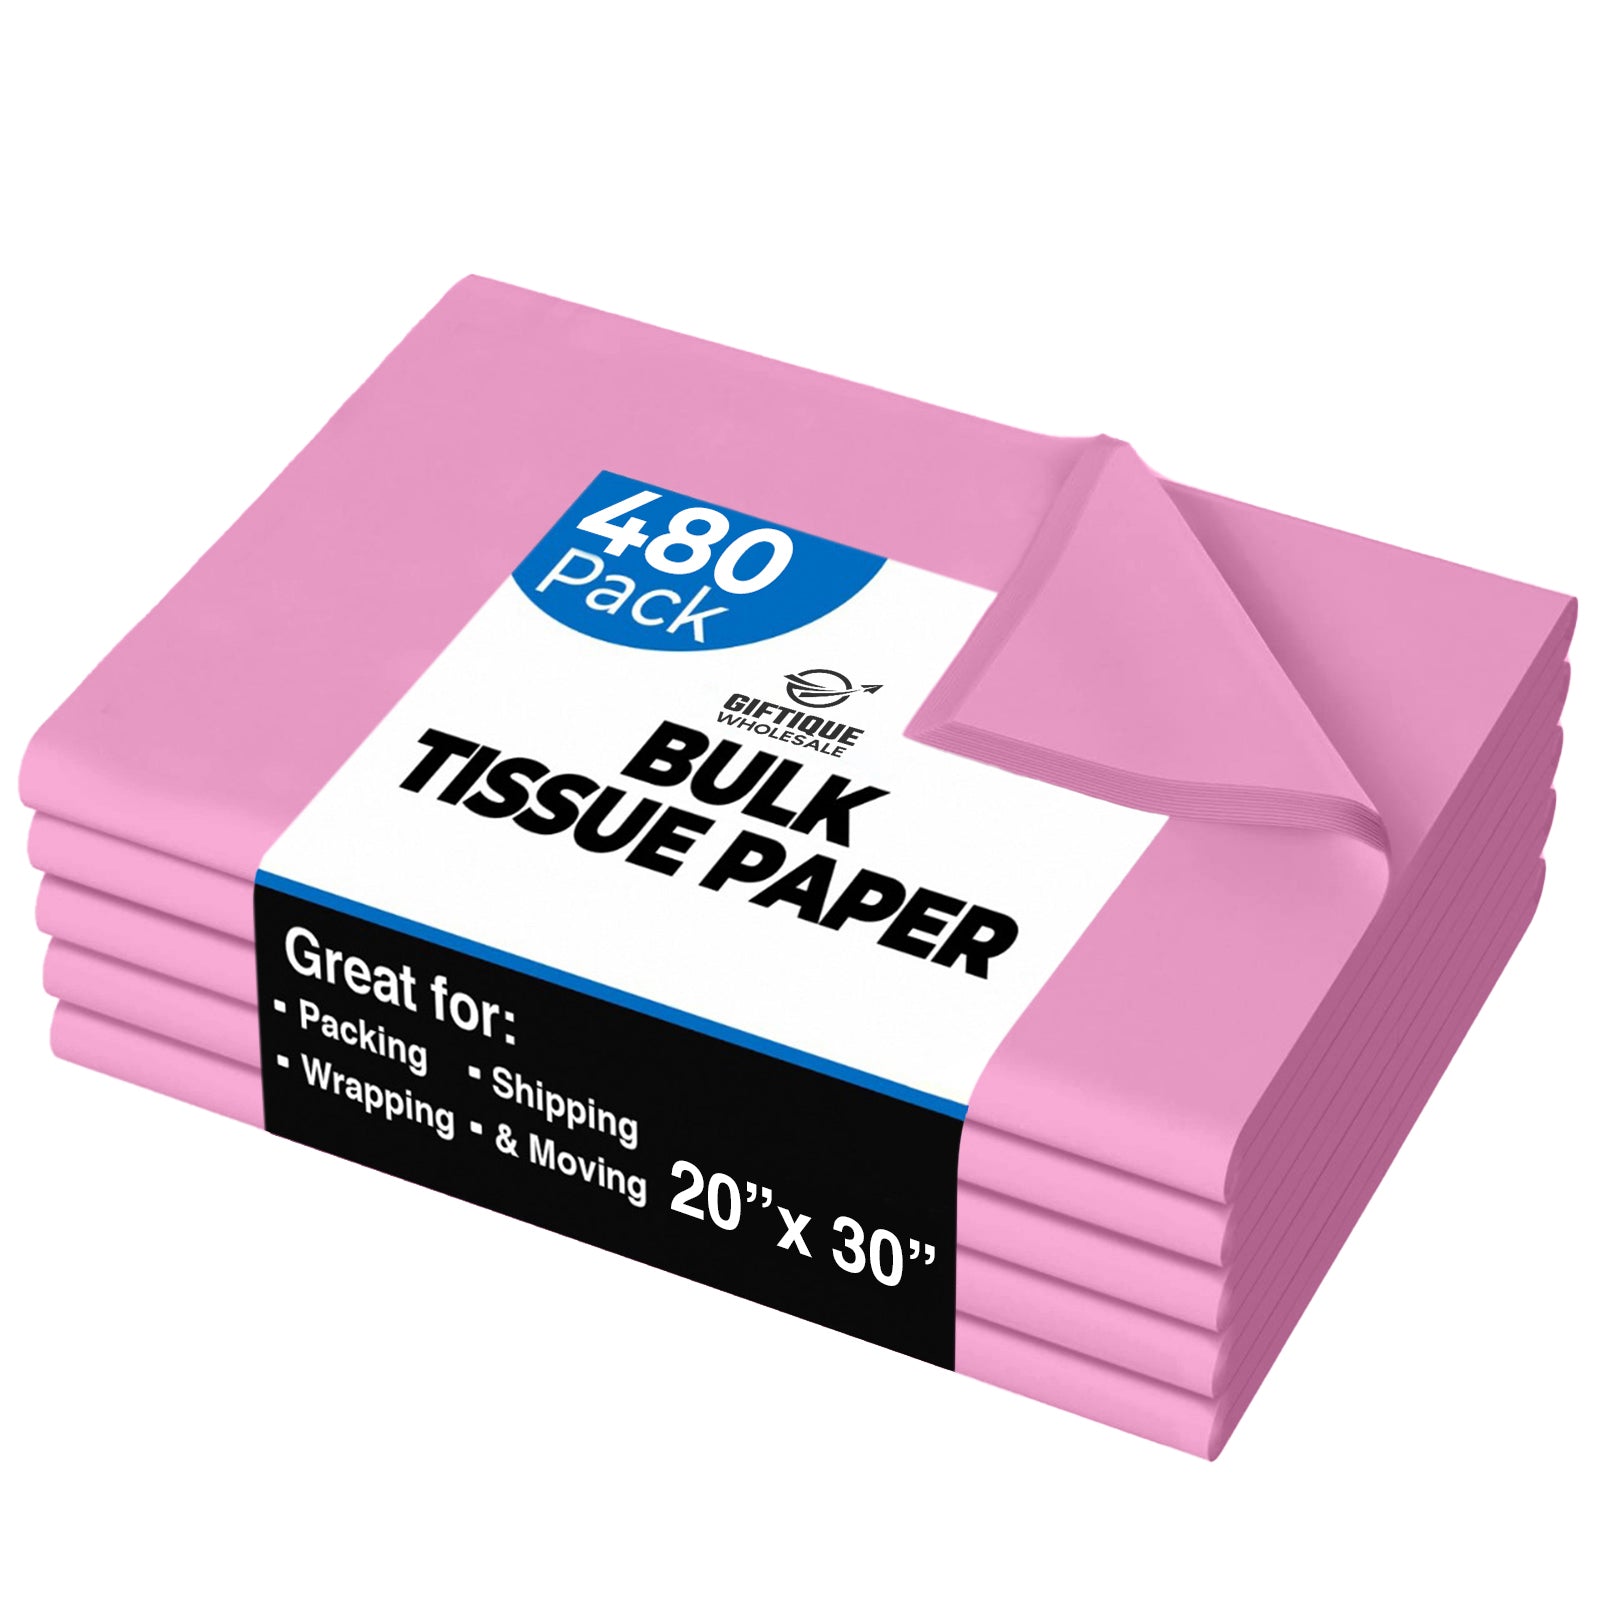 Hot Pink Tissue Paper Squares, Bulk 48 Sheets, Premium Gift Wrap Feronia  packaging, Large 20 Inch x 30 Inch 